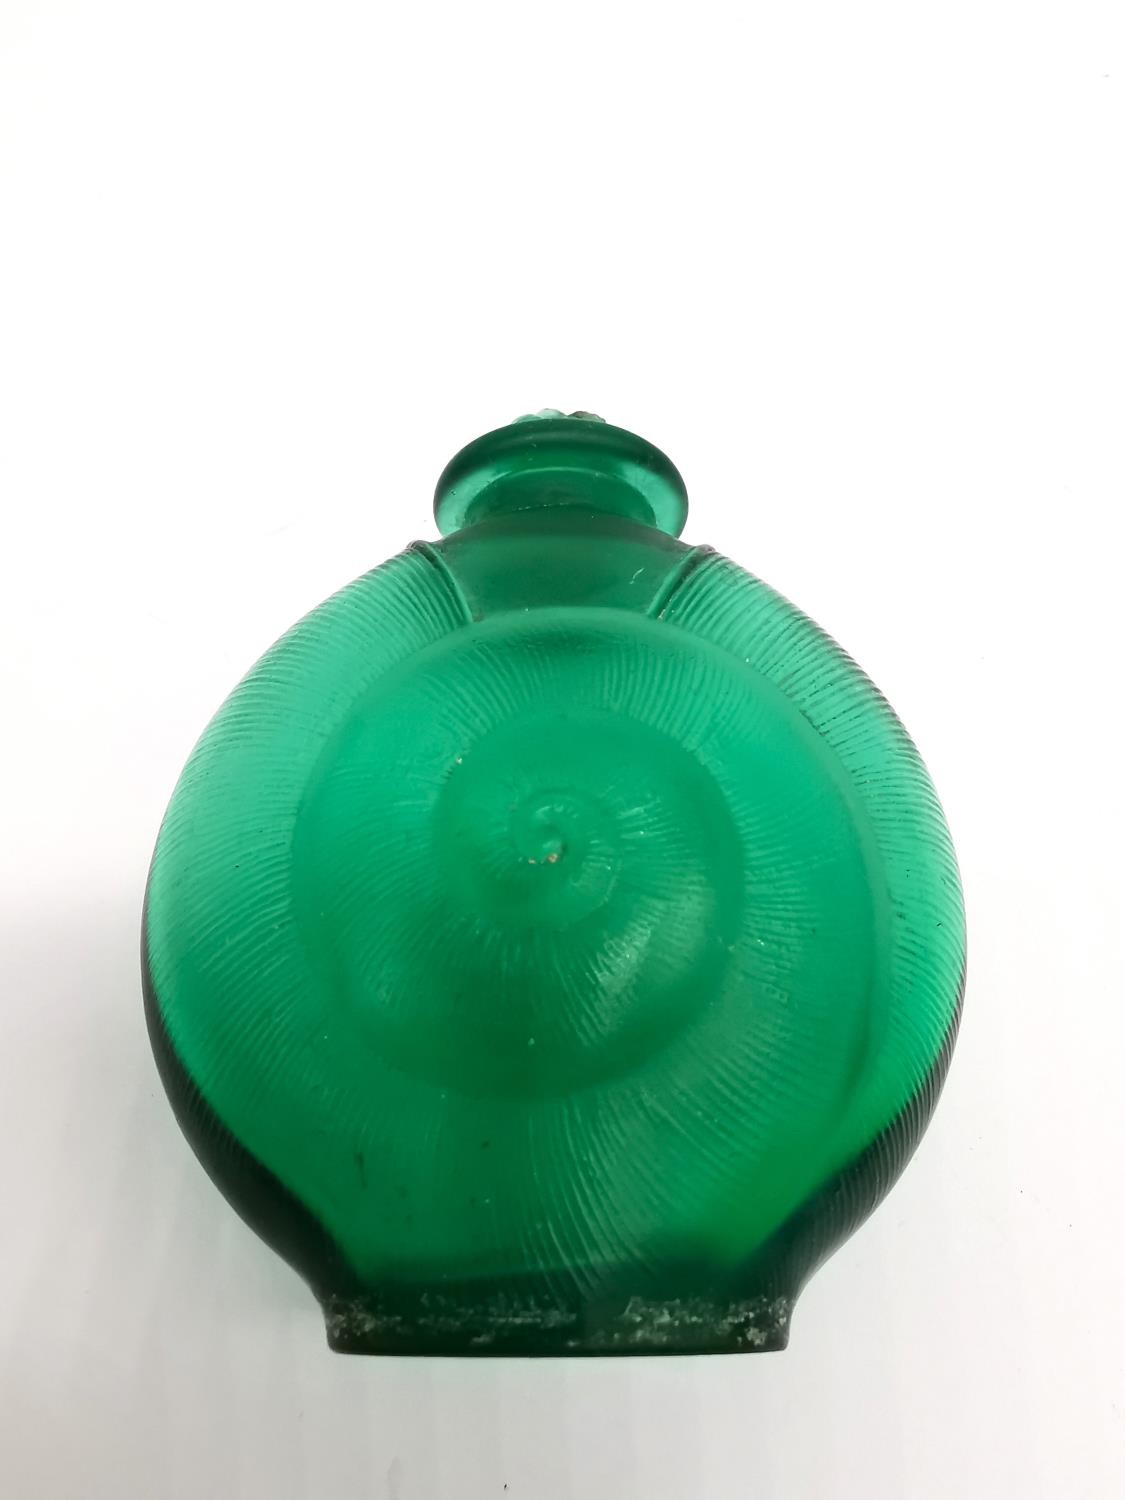 René Lalique (French 1860-1945) Amphitrite scent bottle, No.514 designed 1920 cased green, green - Image 5 of 8